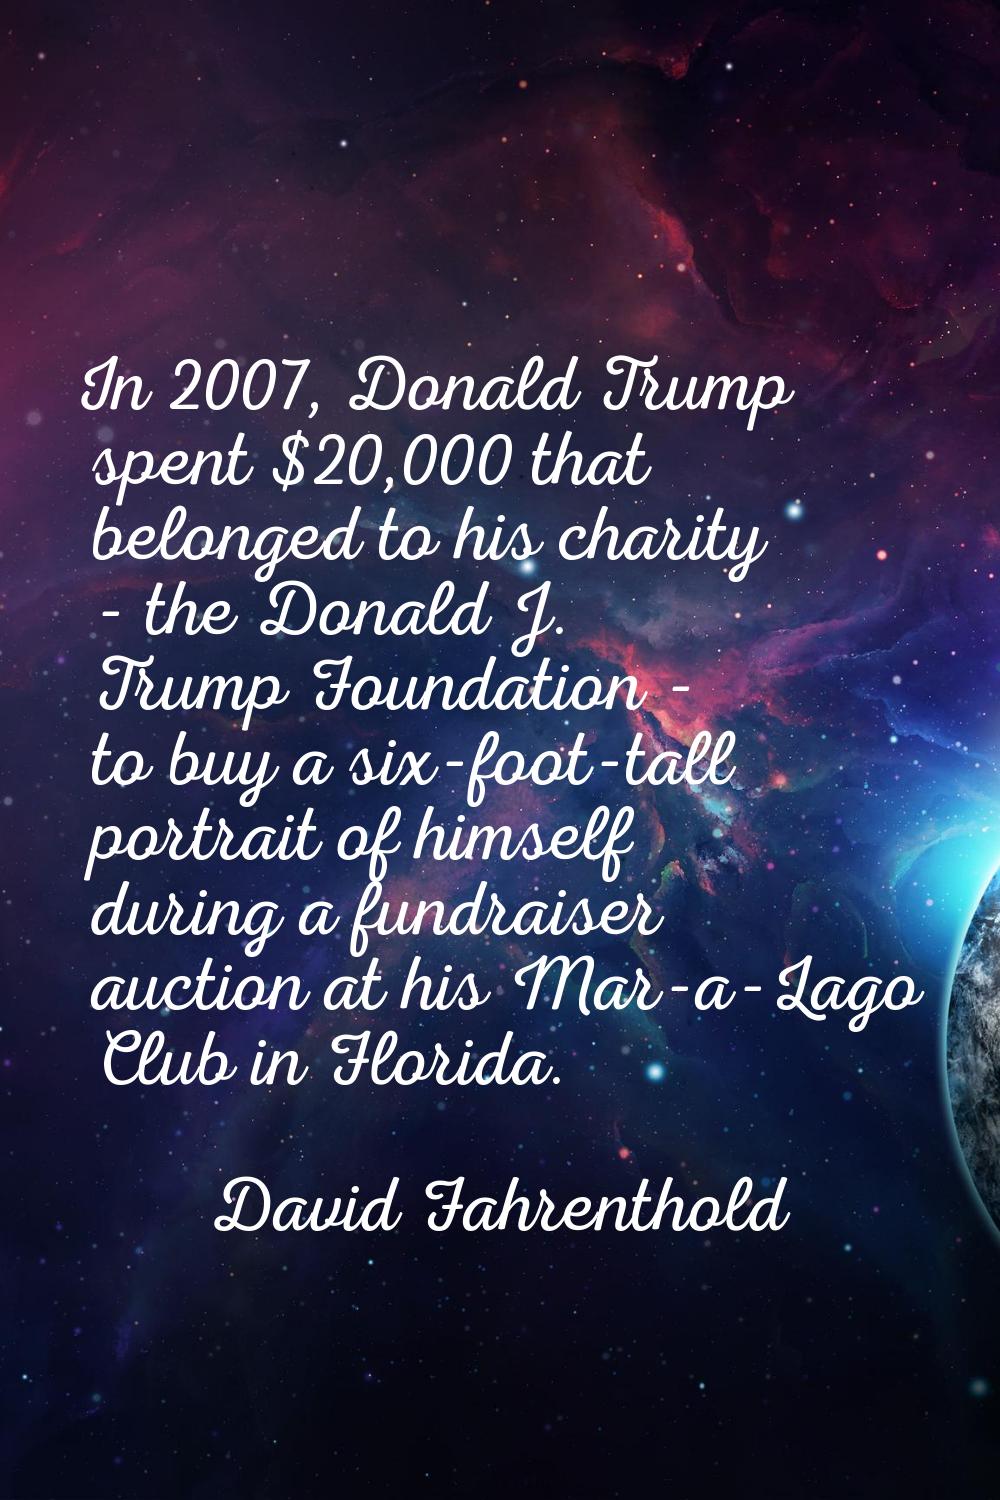 In 2007, Donald Trump spent $20,000 that belonged to his charity - the Donald J. Trump Foundation -